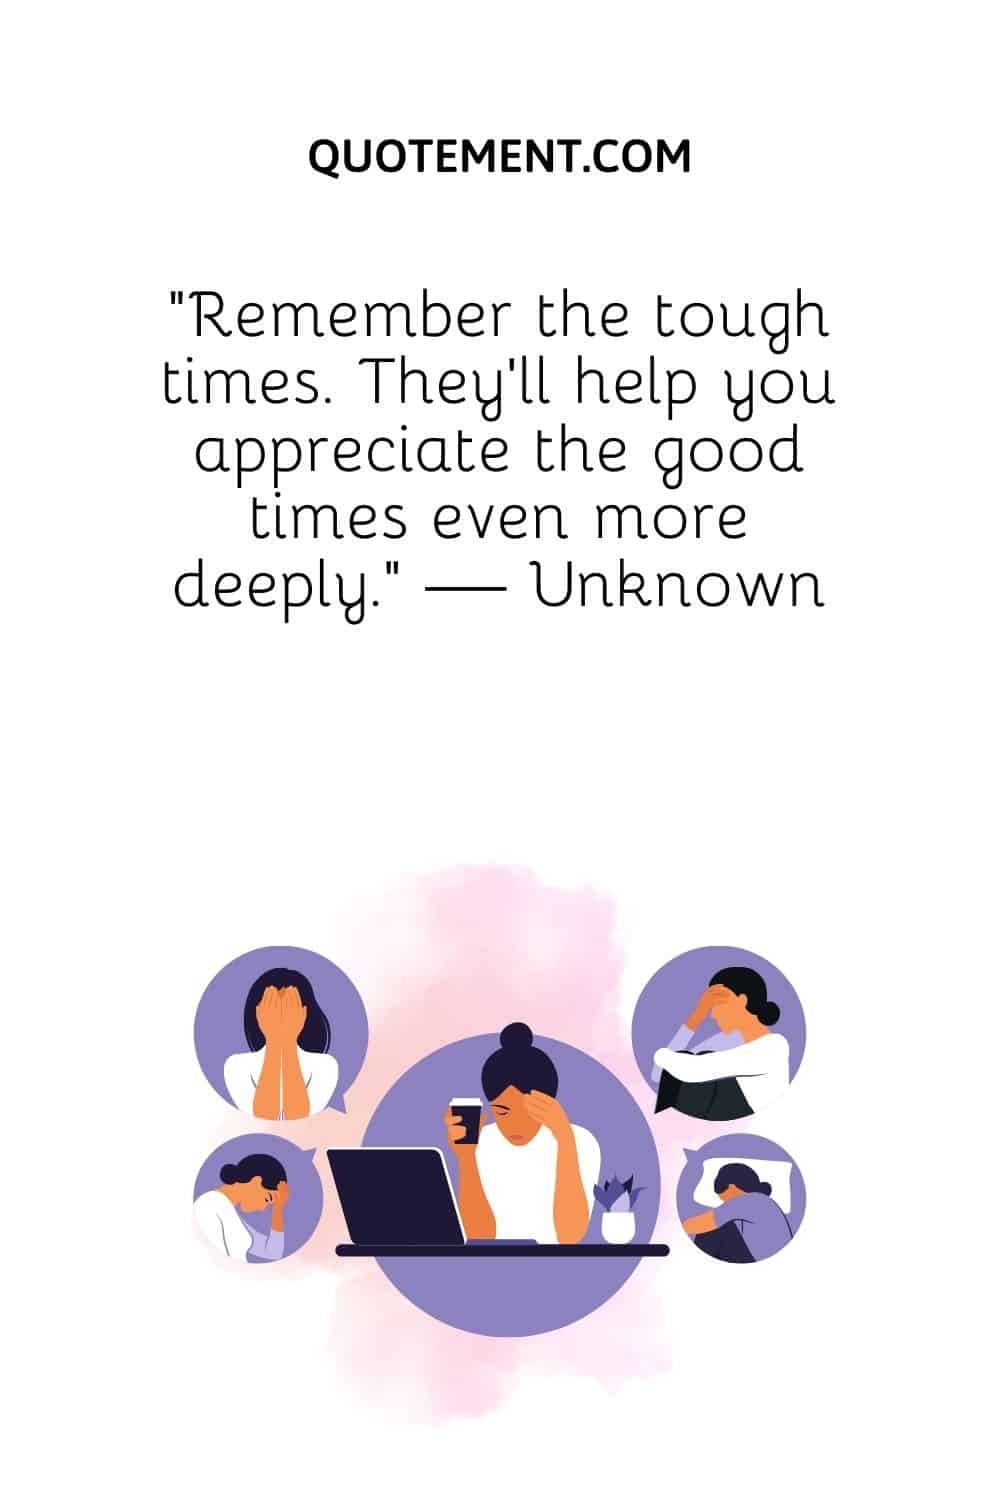 Remember the tough times. They’ll help you appreciate the good times even more deeply